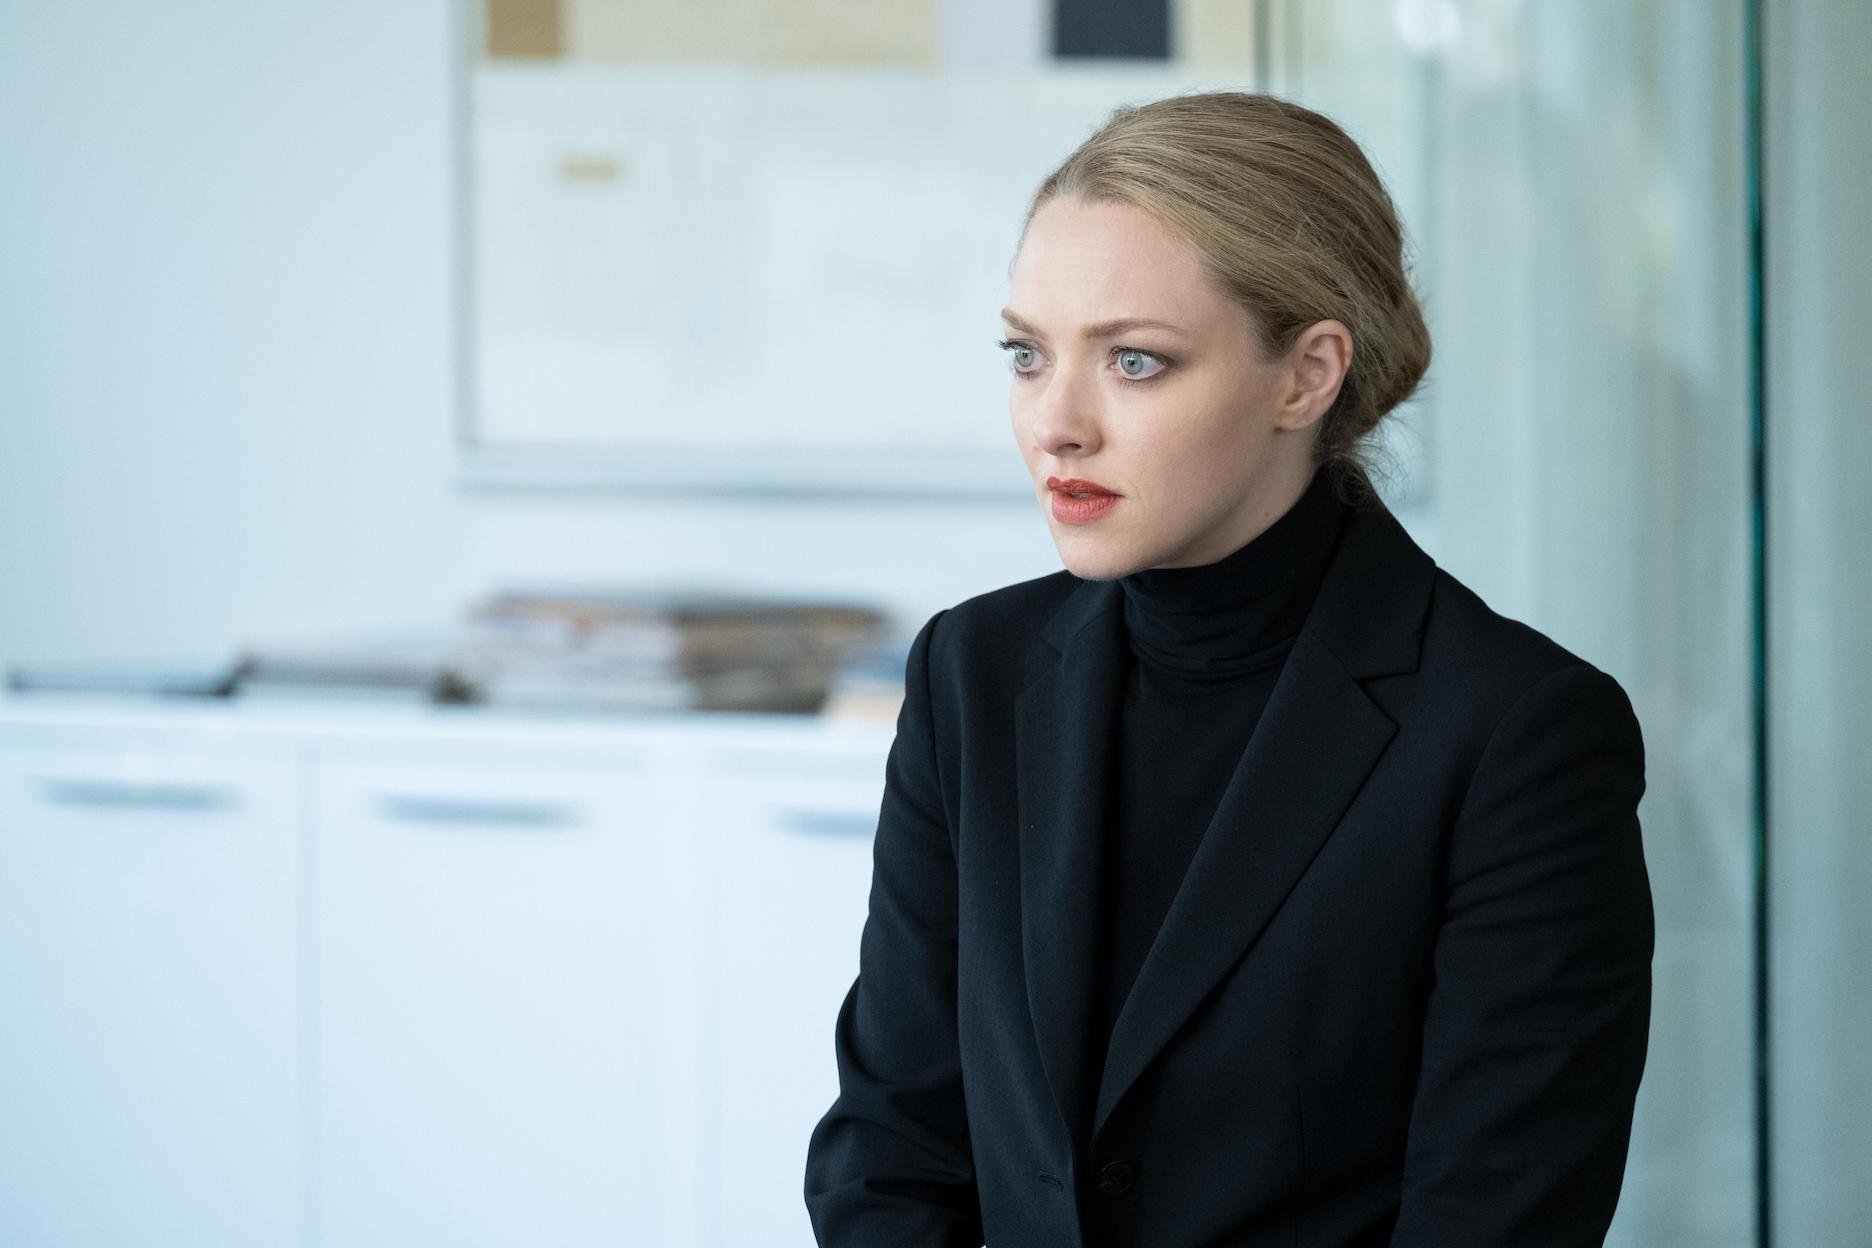 ‘The Dropout’: Amanda Seyfried Thought ‘My Body Is Meant for This Moment’ When She Put on Elizabeth Holmes’ Black Turtleneck